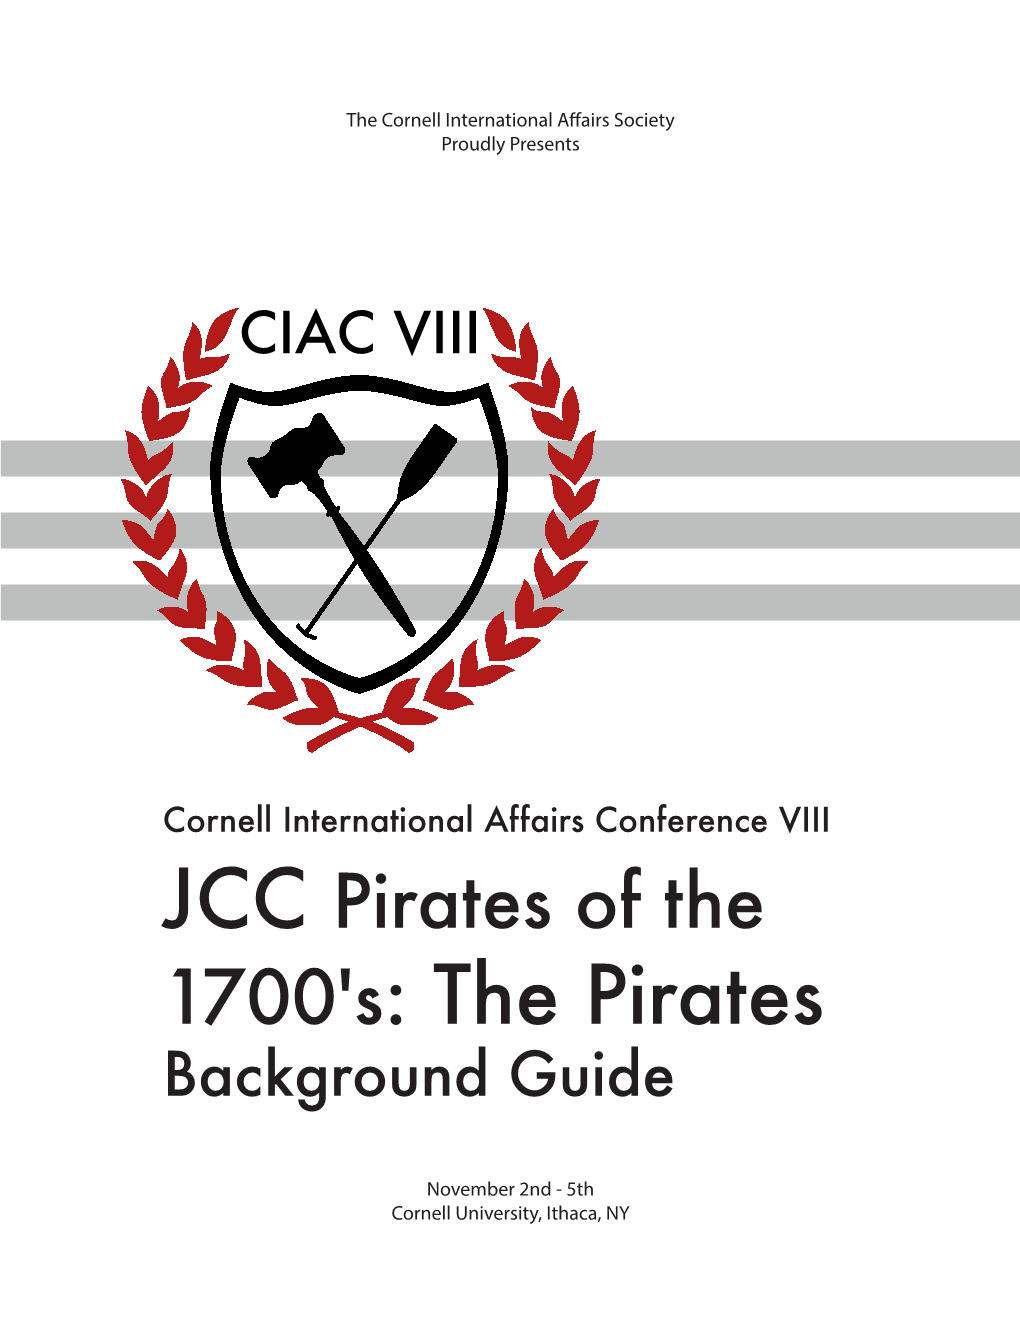 The Pirates Background Guide